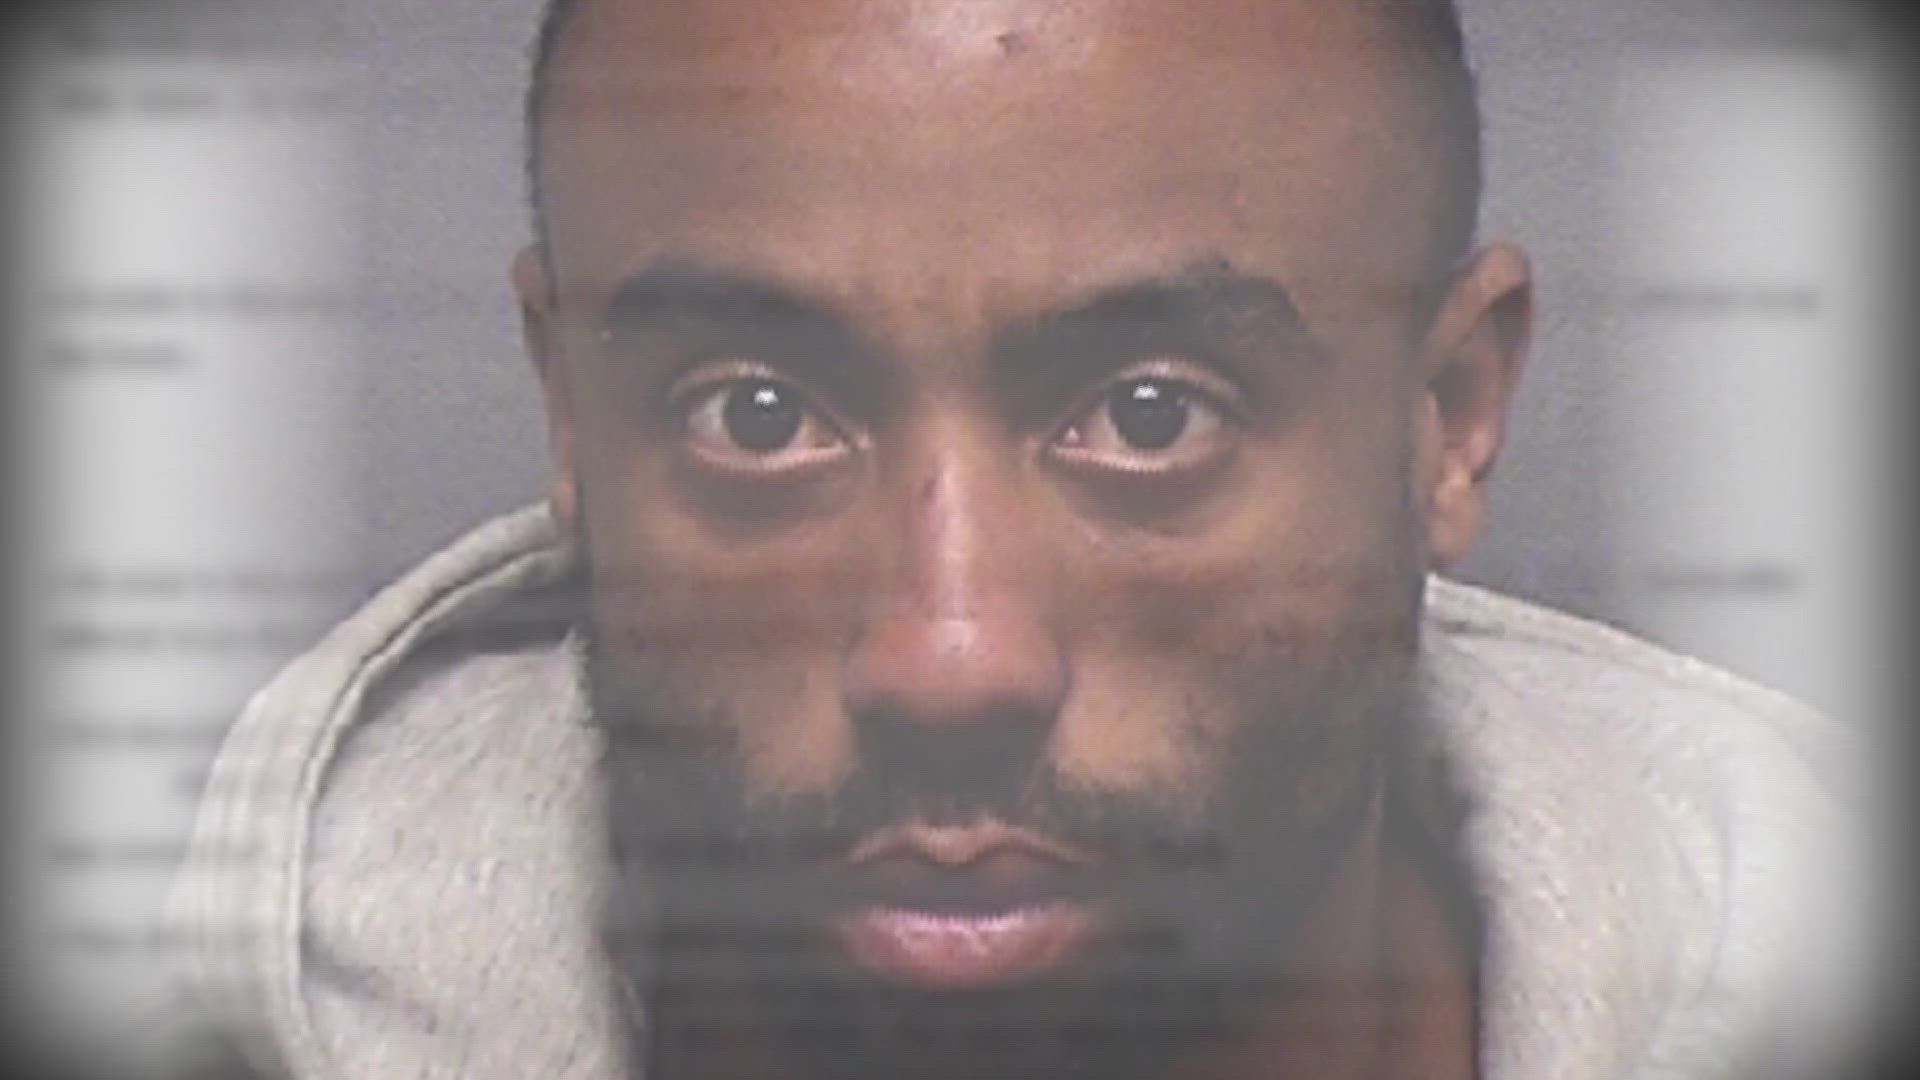 Police say Montre Shepherd is responsible for multiple attempted sexual assaults.